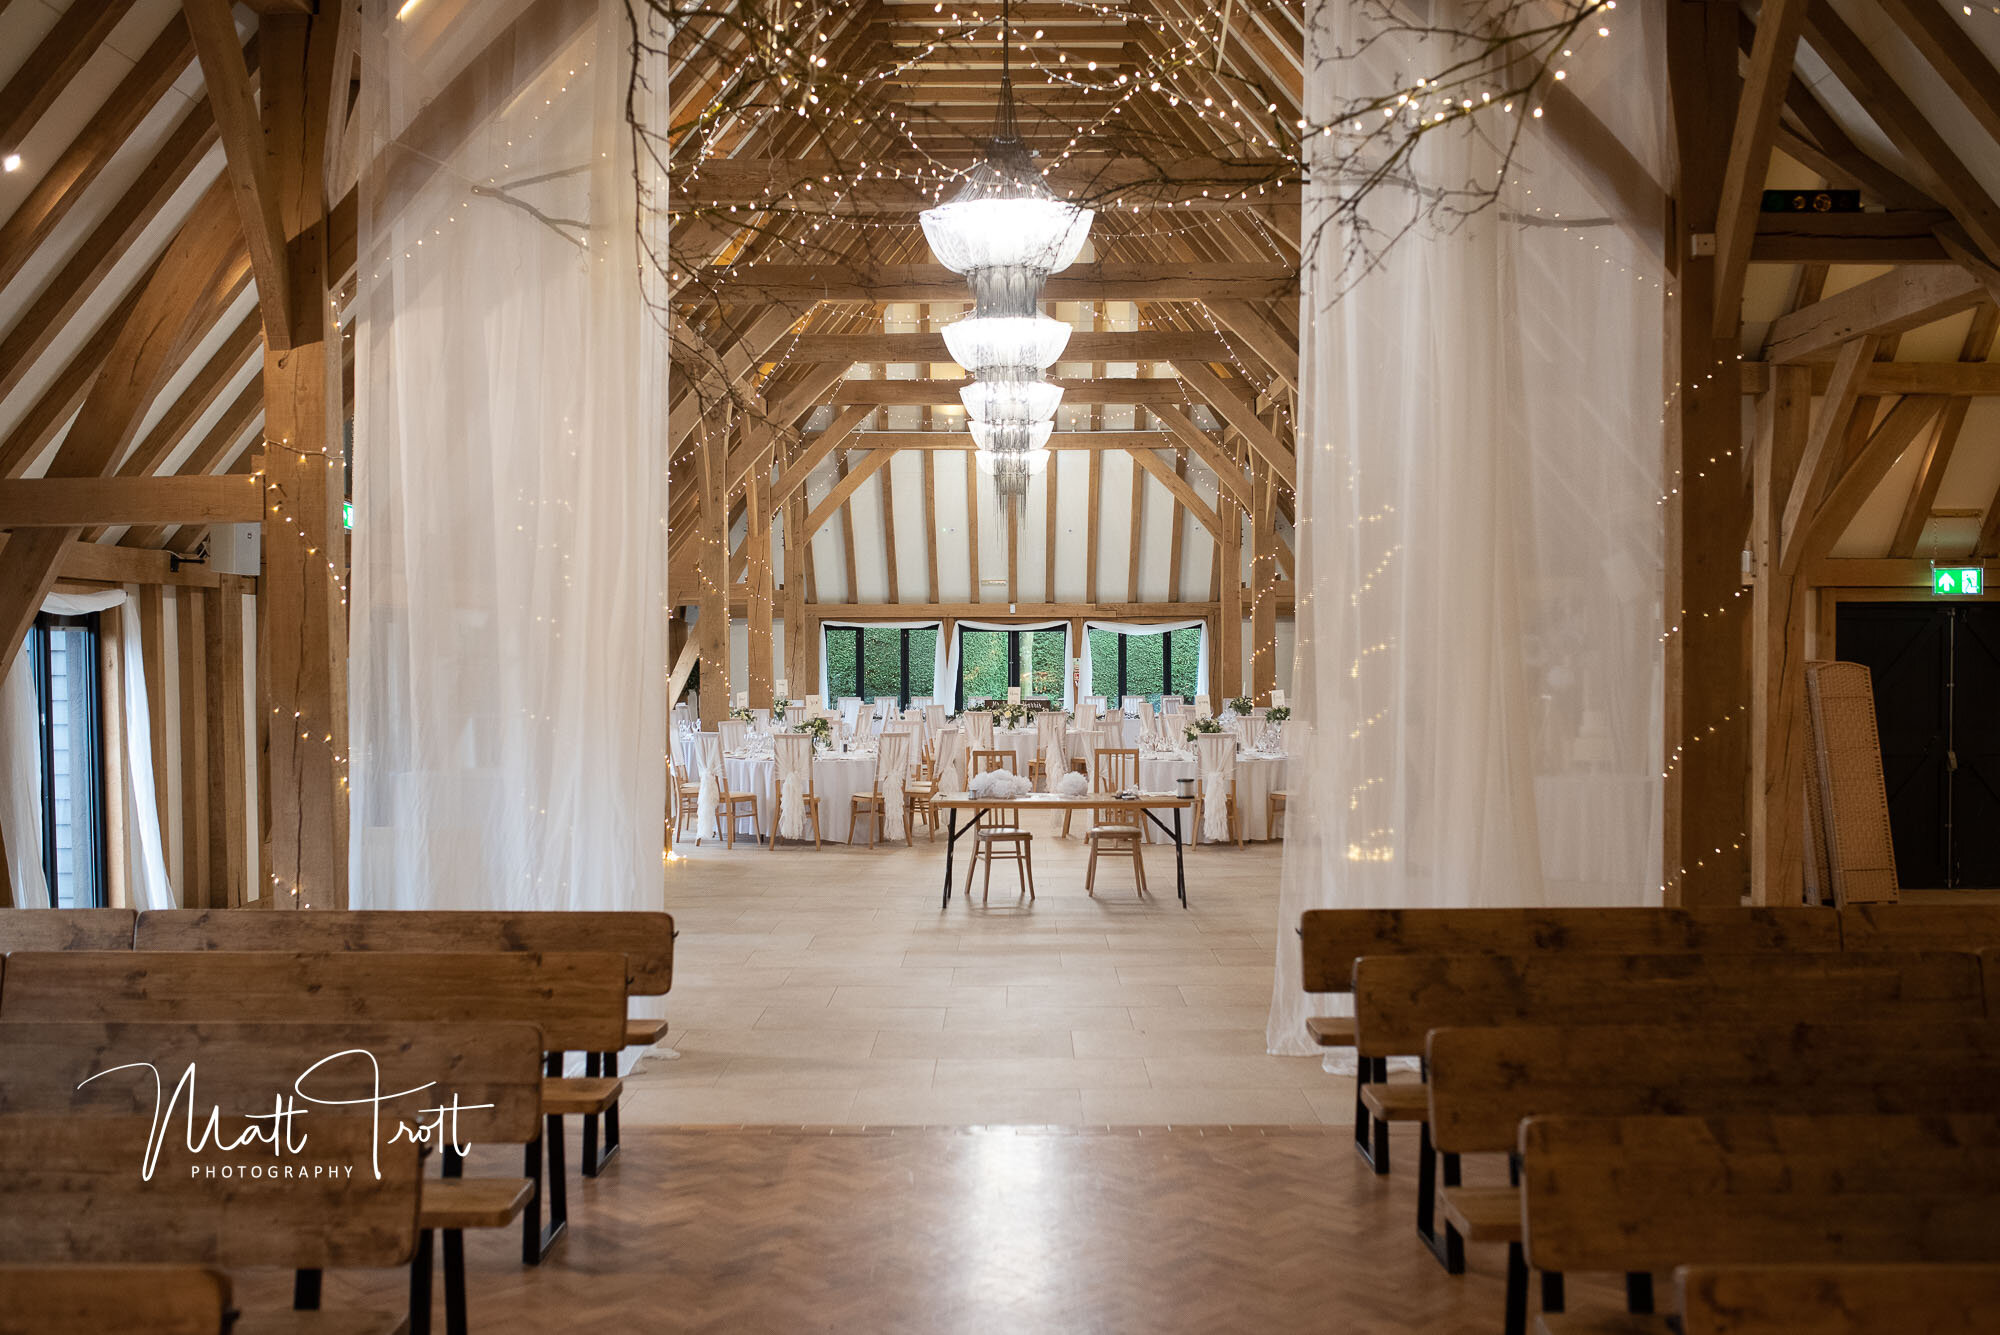 Ceremony space at the old kent barn